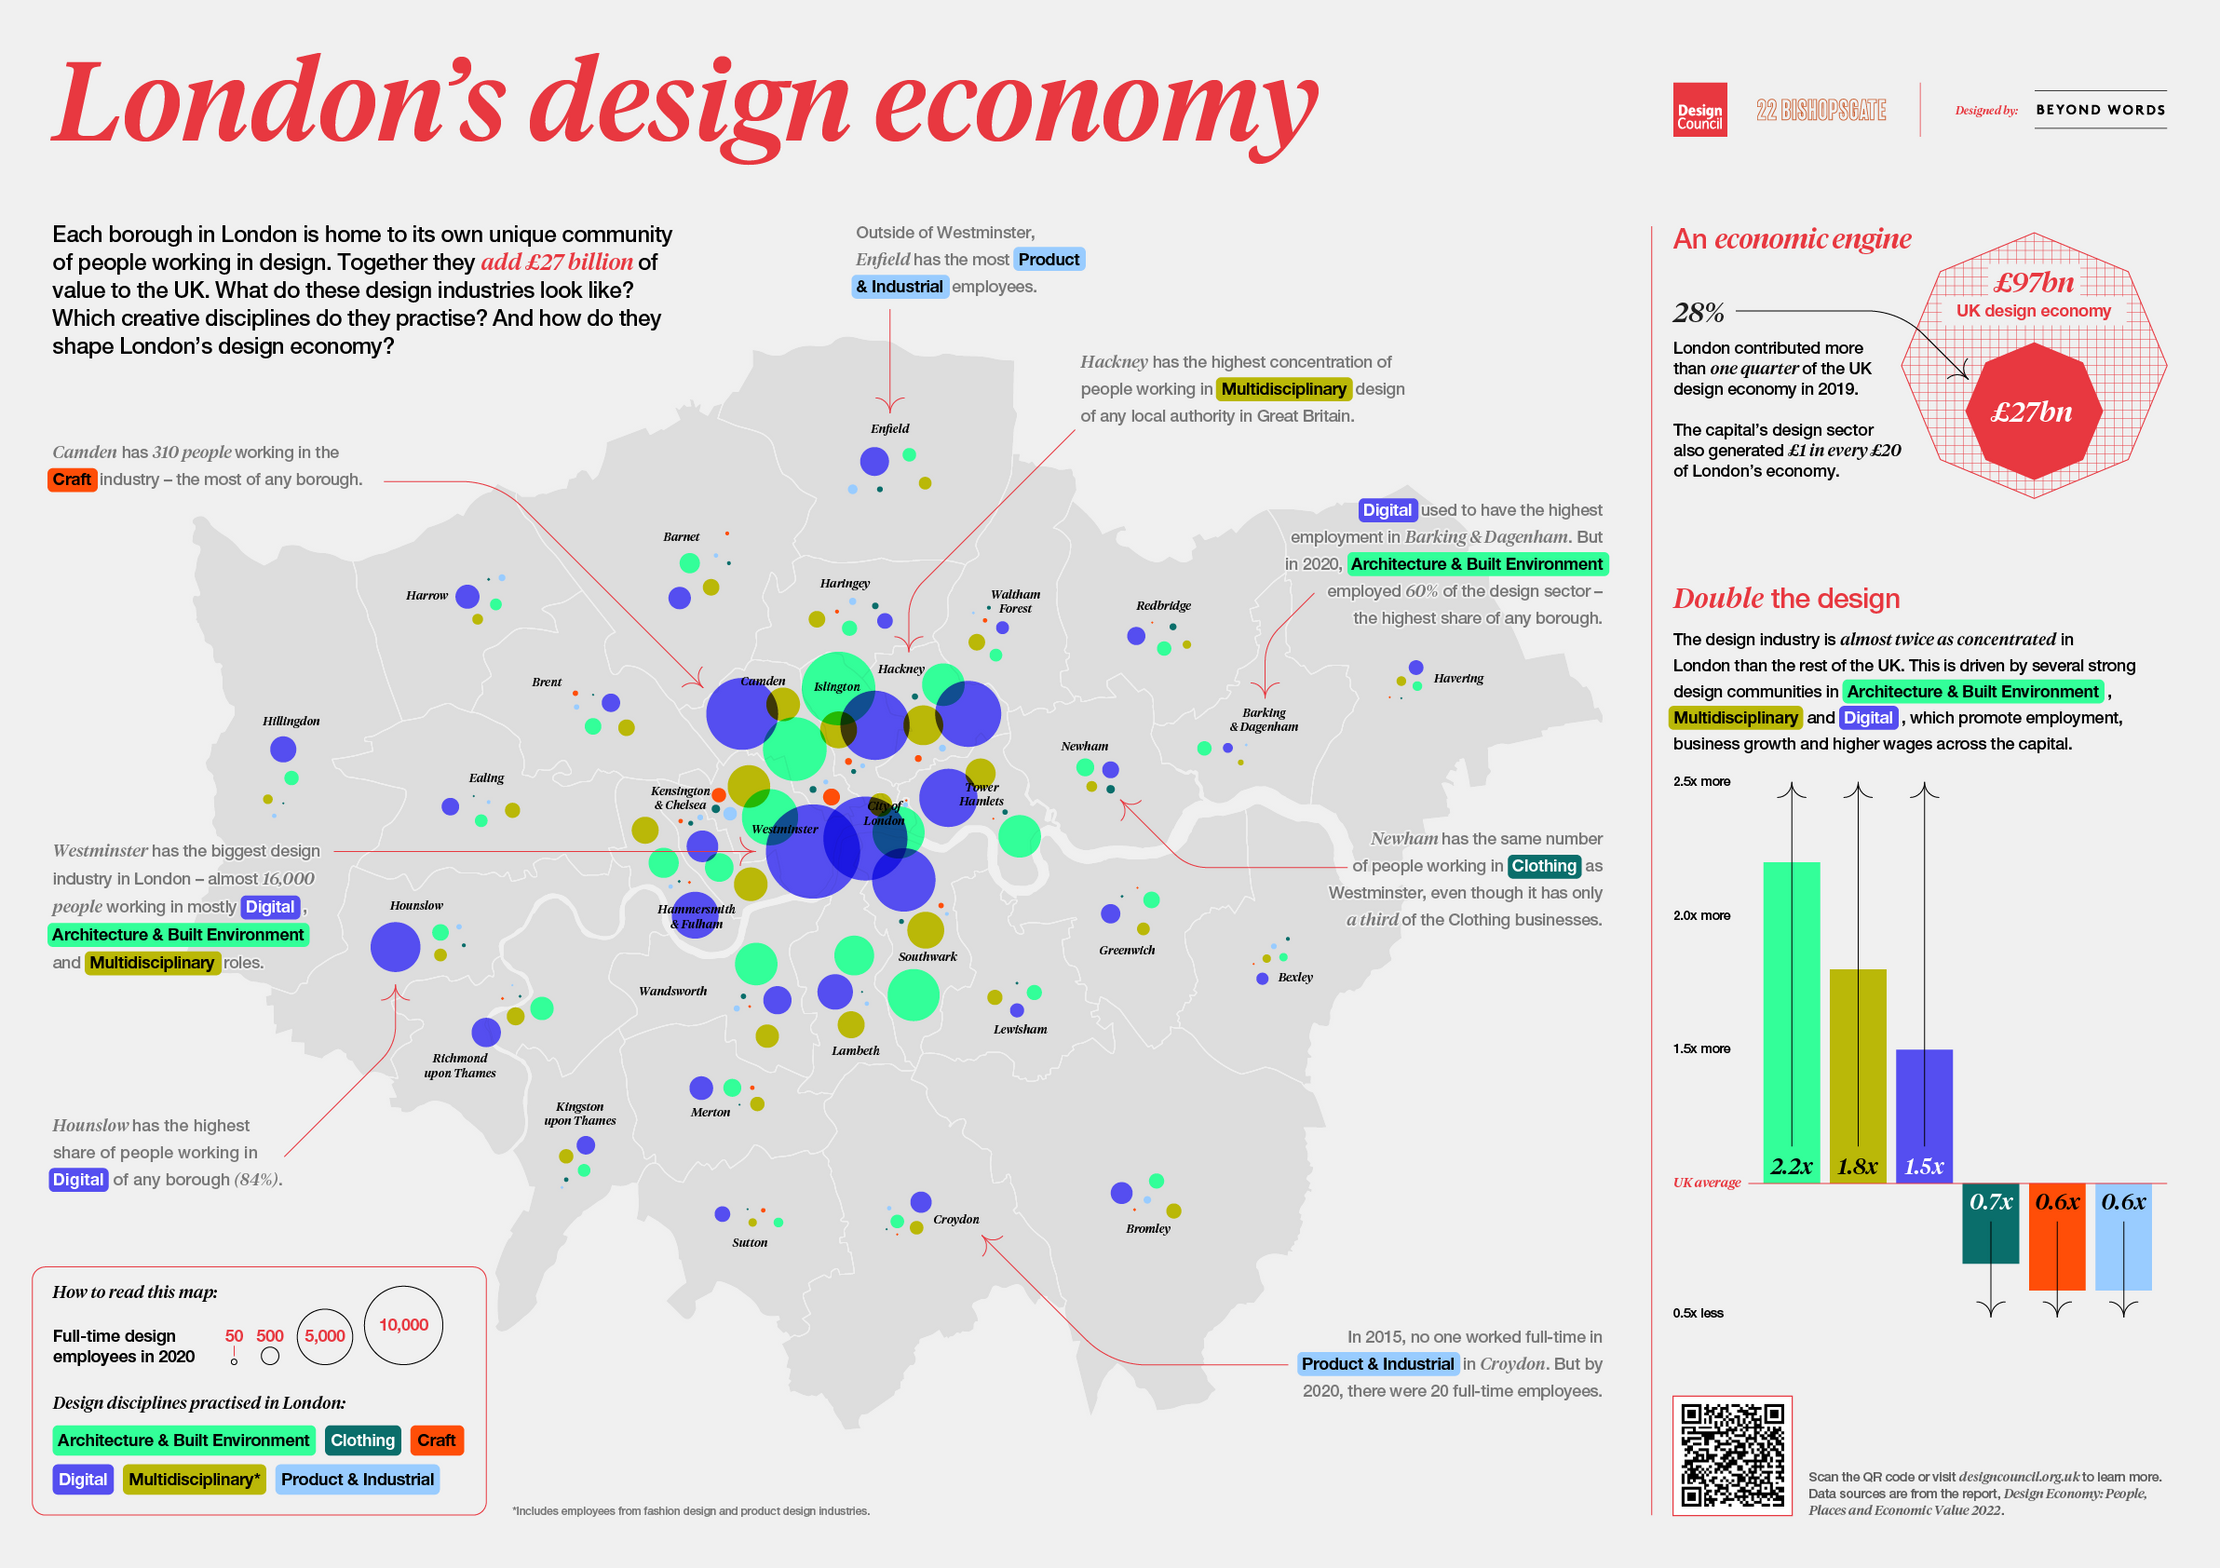 The final poster for Design Council’s Mapping London’s Design Economy project. The primary visualization is on the left with two supporting mini visualizations on the right.